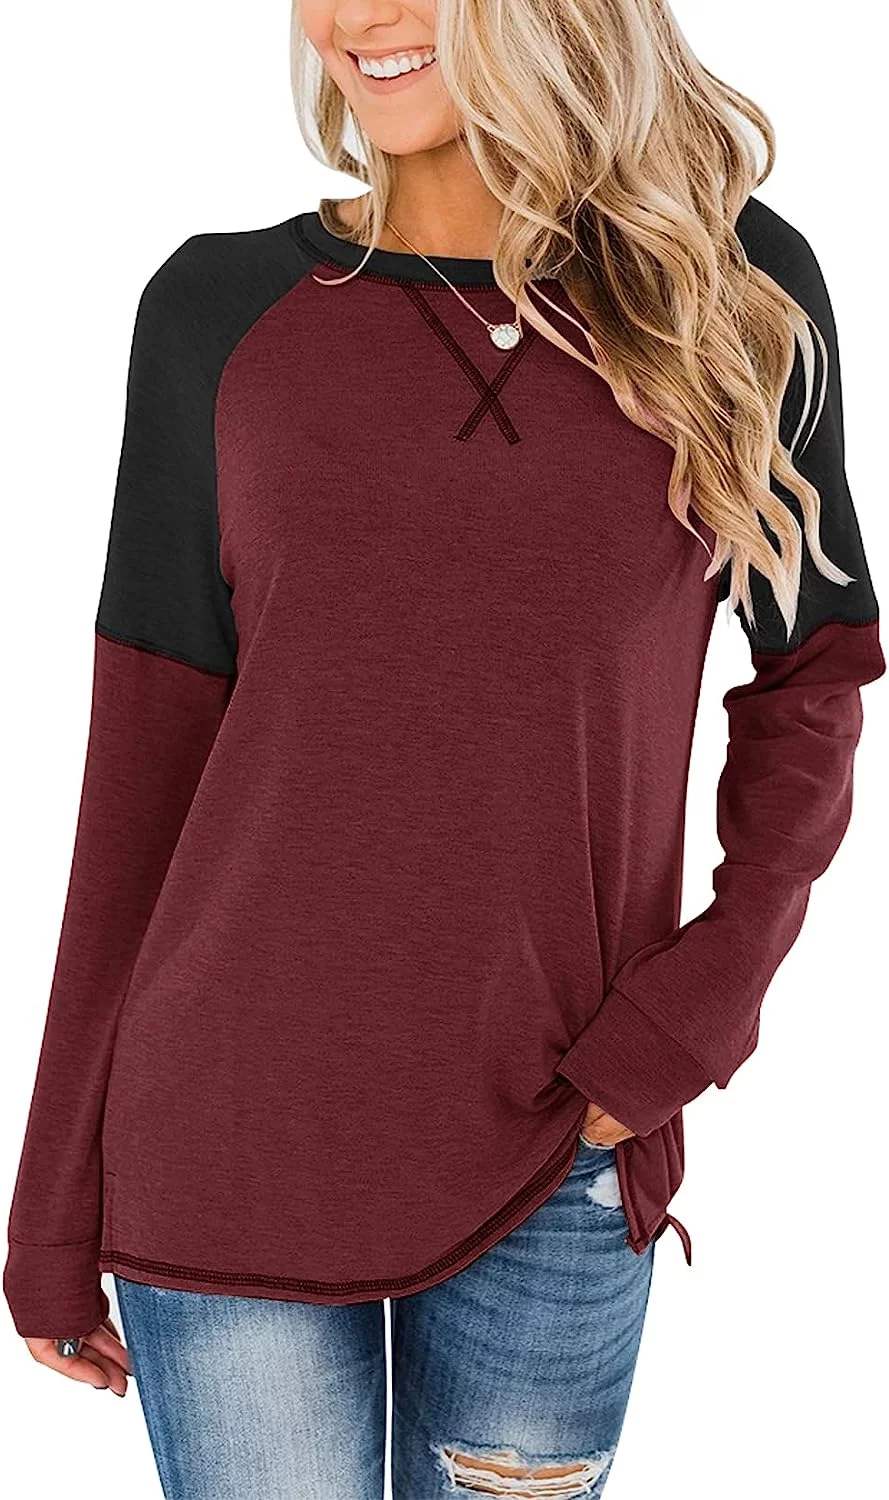 Anyjoin Women's Casual Long Sleeve Tunic Tops Crew Neck Color Block Blouses